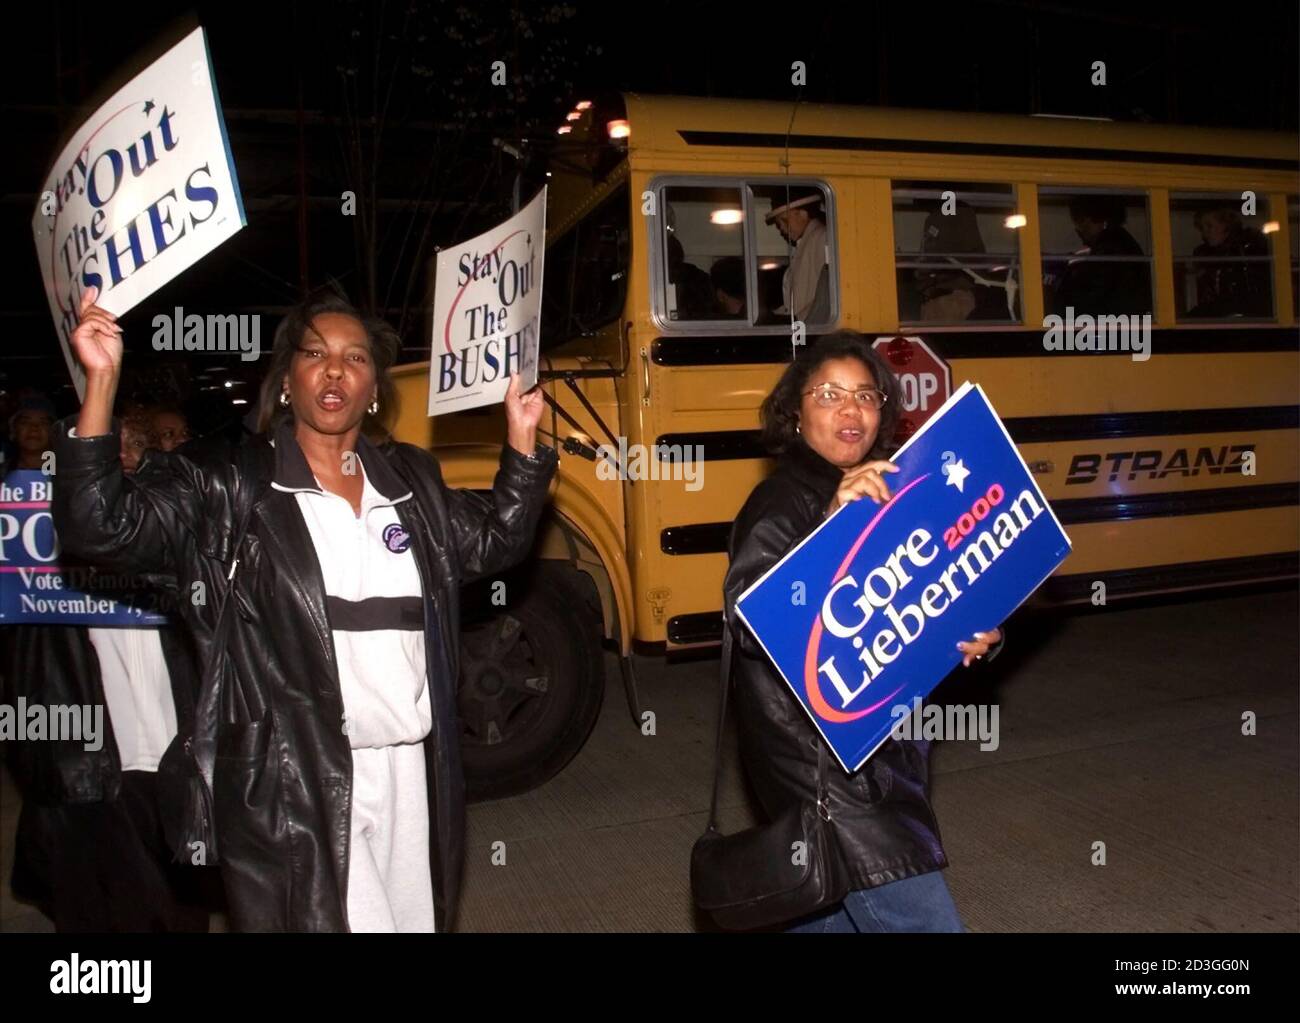 Members of the Wesley Center Church, a primarily black church, in Pittsburgh unload from school buses after Vice President Al Gore invited them to attend a rally on the predominantly white side of town at the International Brotherhood of Electrical Workers Local #5 November 4, 2000. With less than three days remaining in the campaign, Gore is seeking a strong turn out from the black community in his bid for the presidency against Republican presidential candidate Texas Governor George W. Bush.  WM Stock Photo